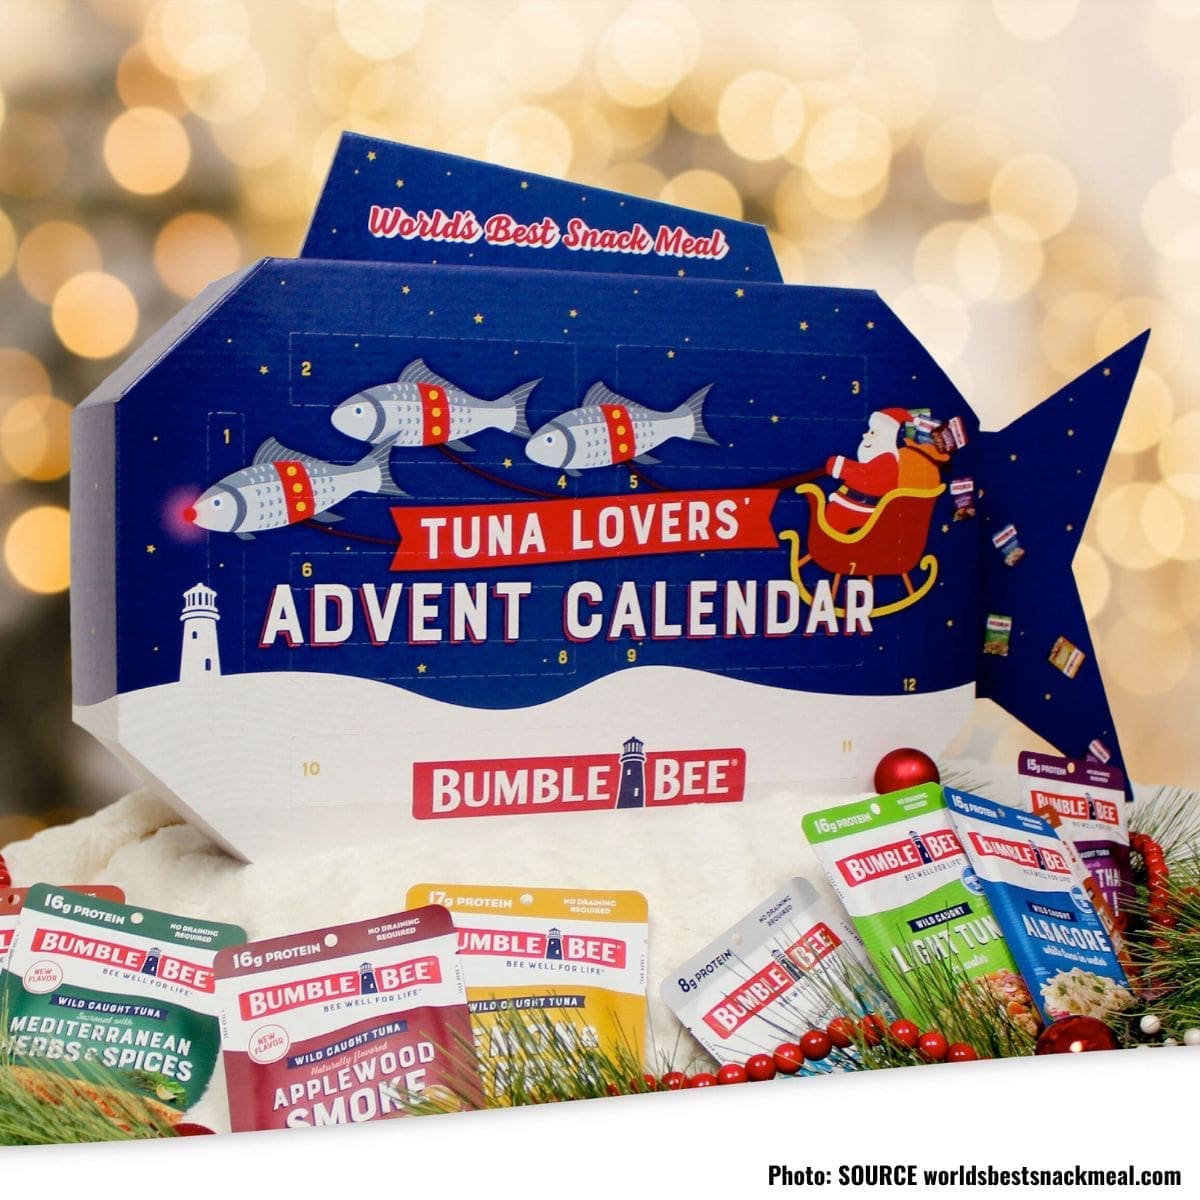 Bumble Bee Tuna Advent Calendar with 8 different tuna varieties, including a secret gift.